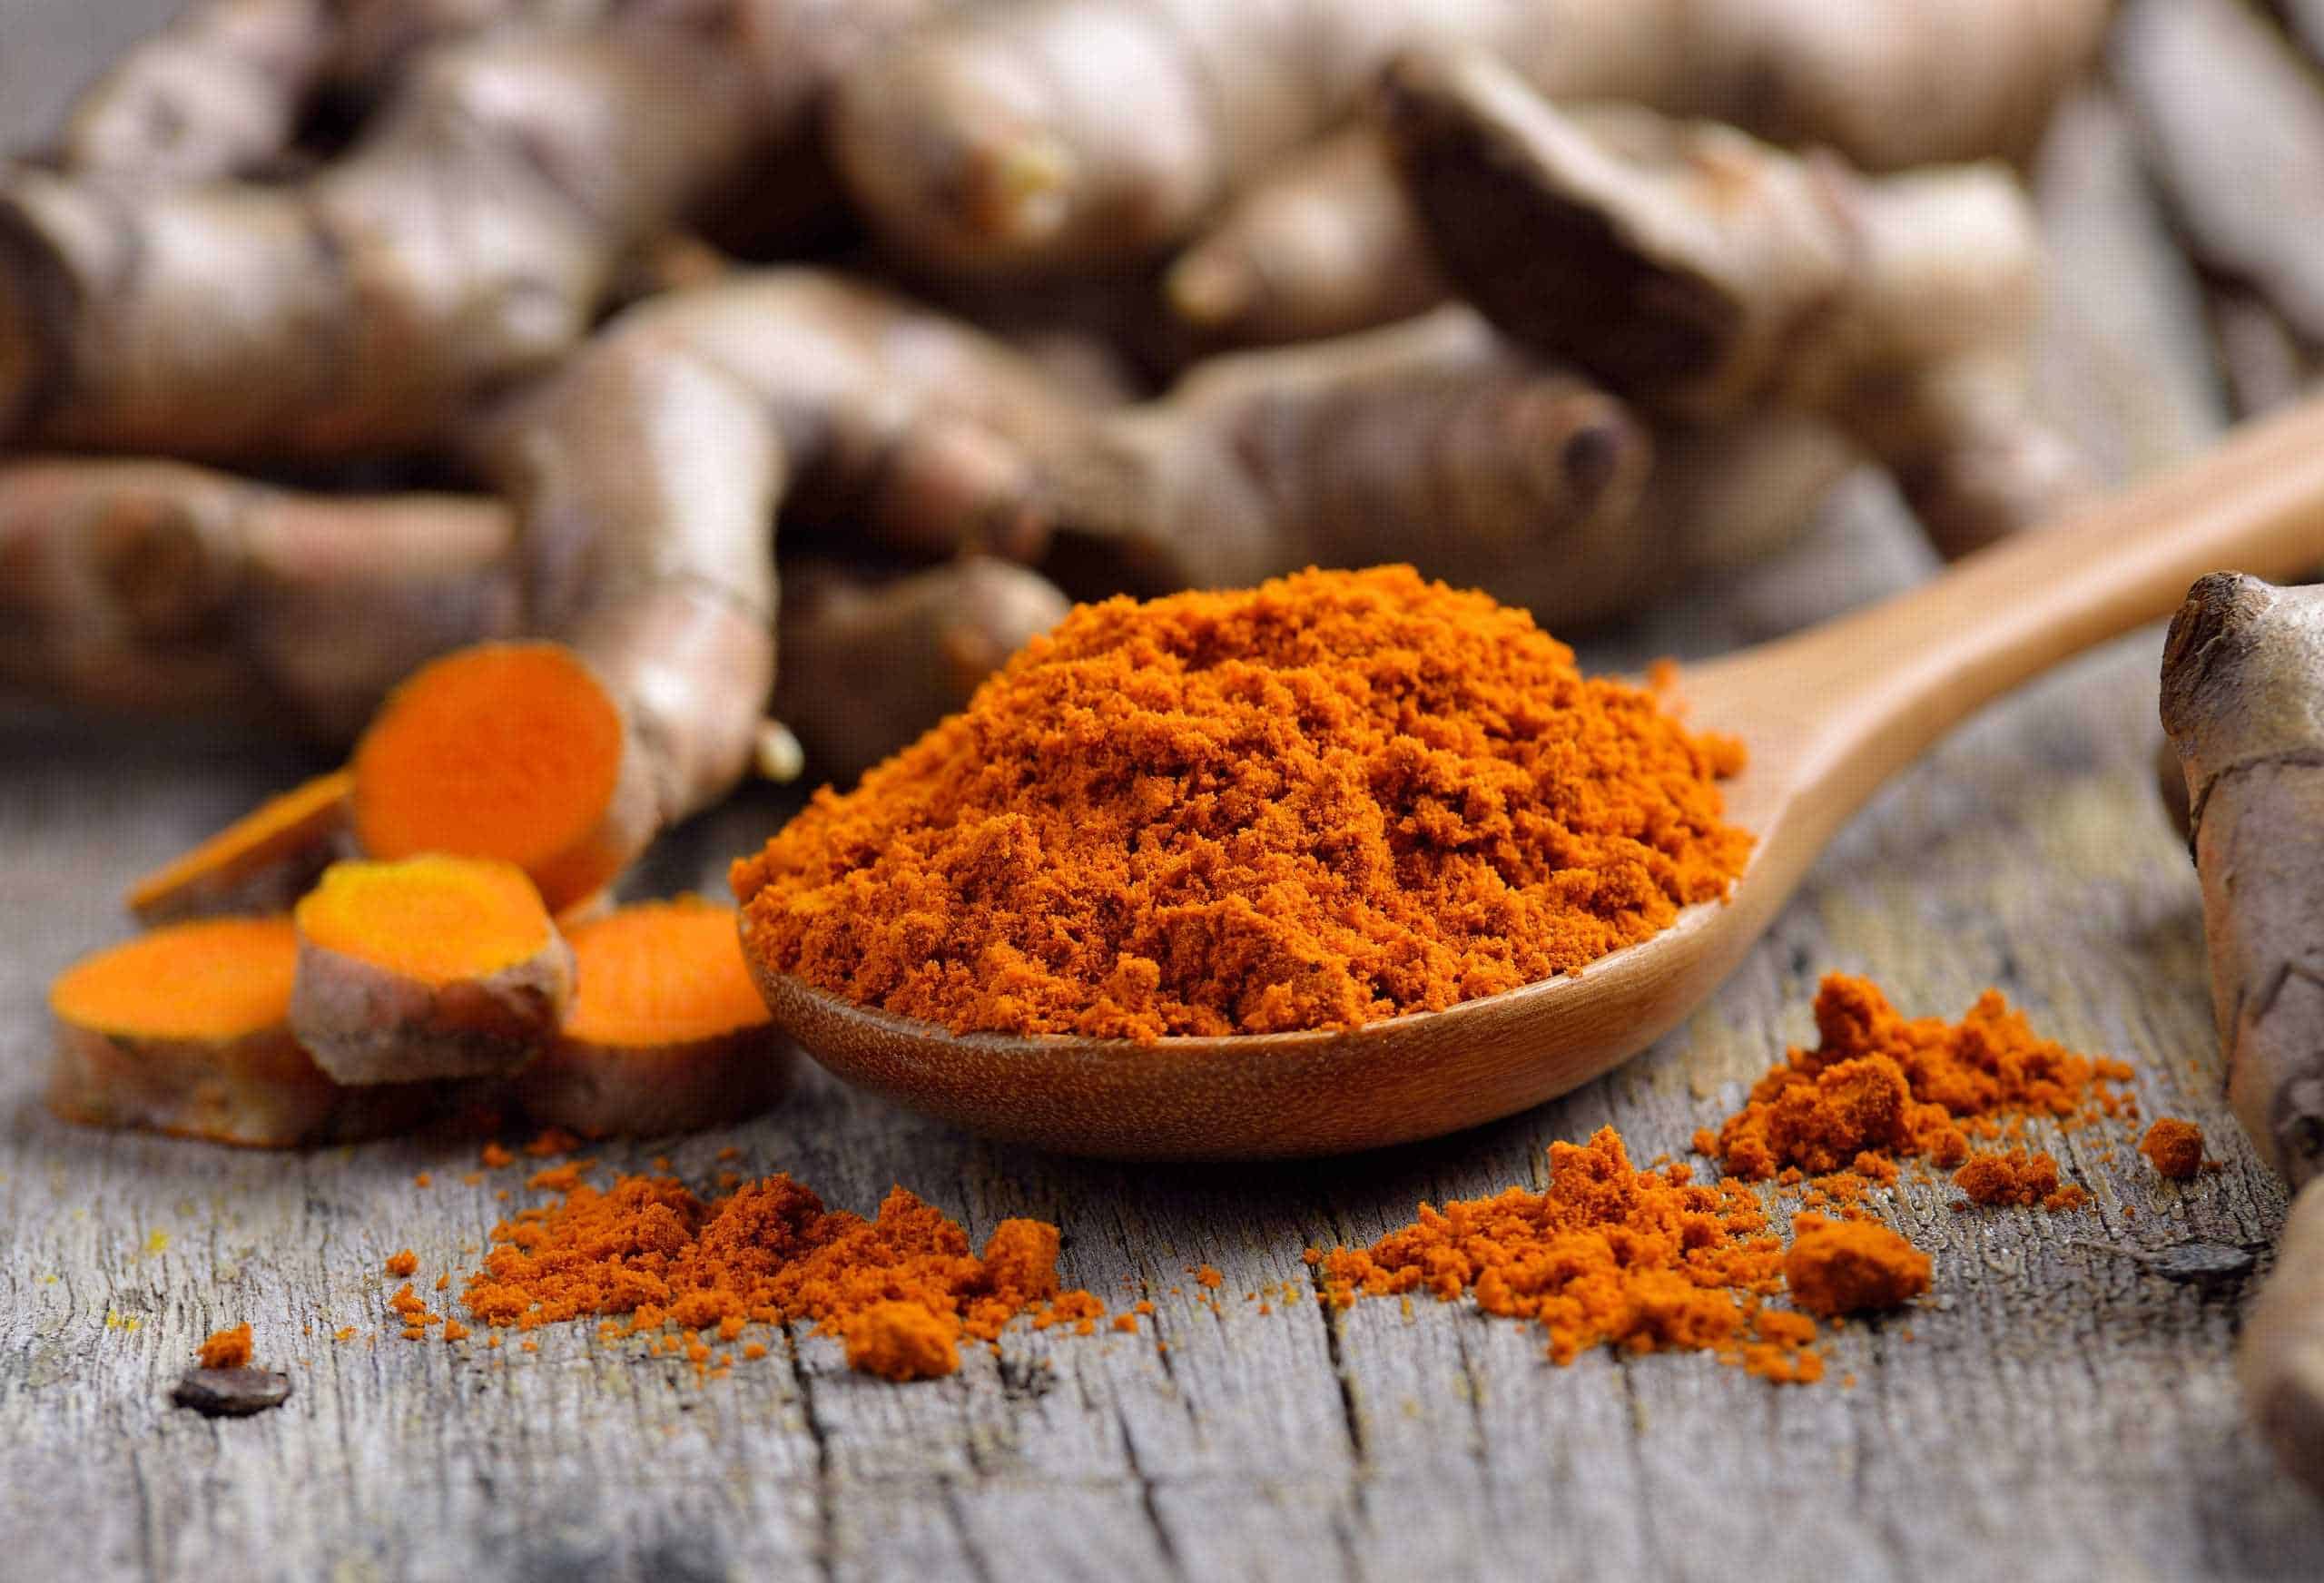 Curcumin iv therapy for cancer treatment